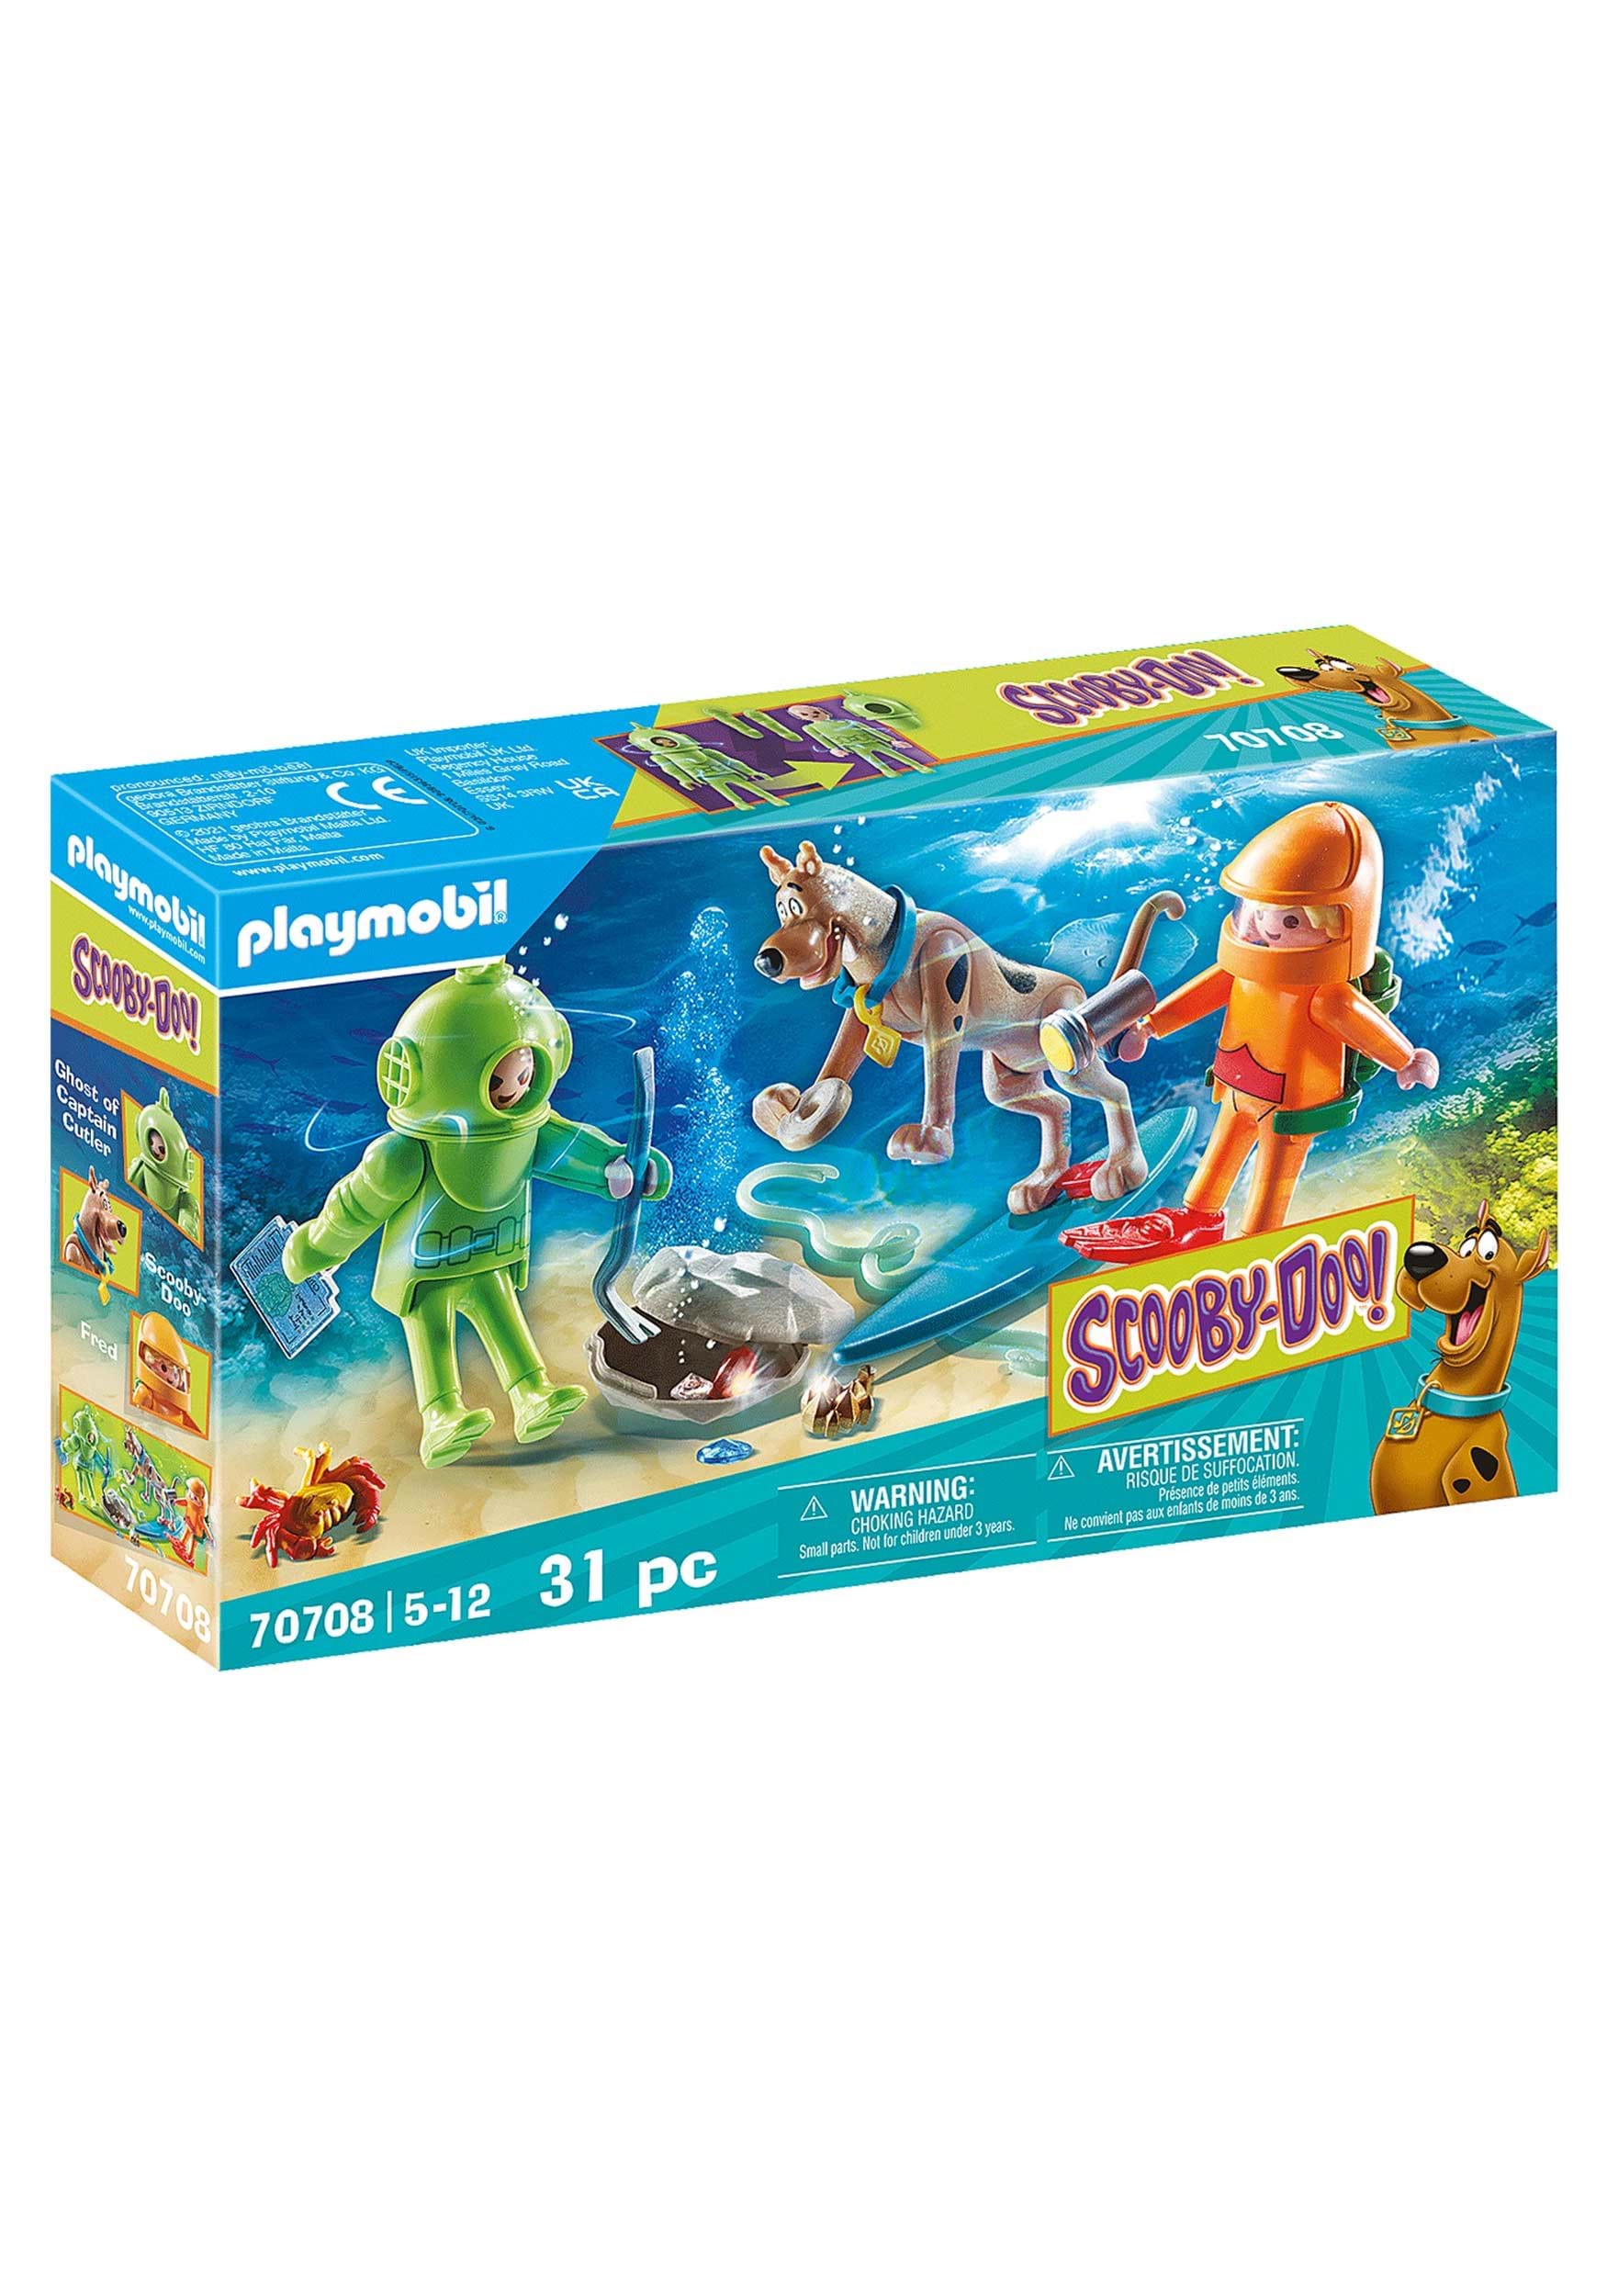 Playmobil SCOOBY-DOO! Playset: Adventure with Ghost of Captain Cutler